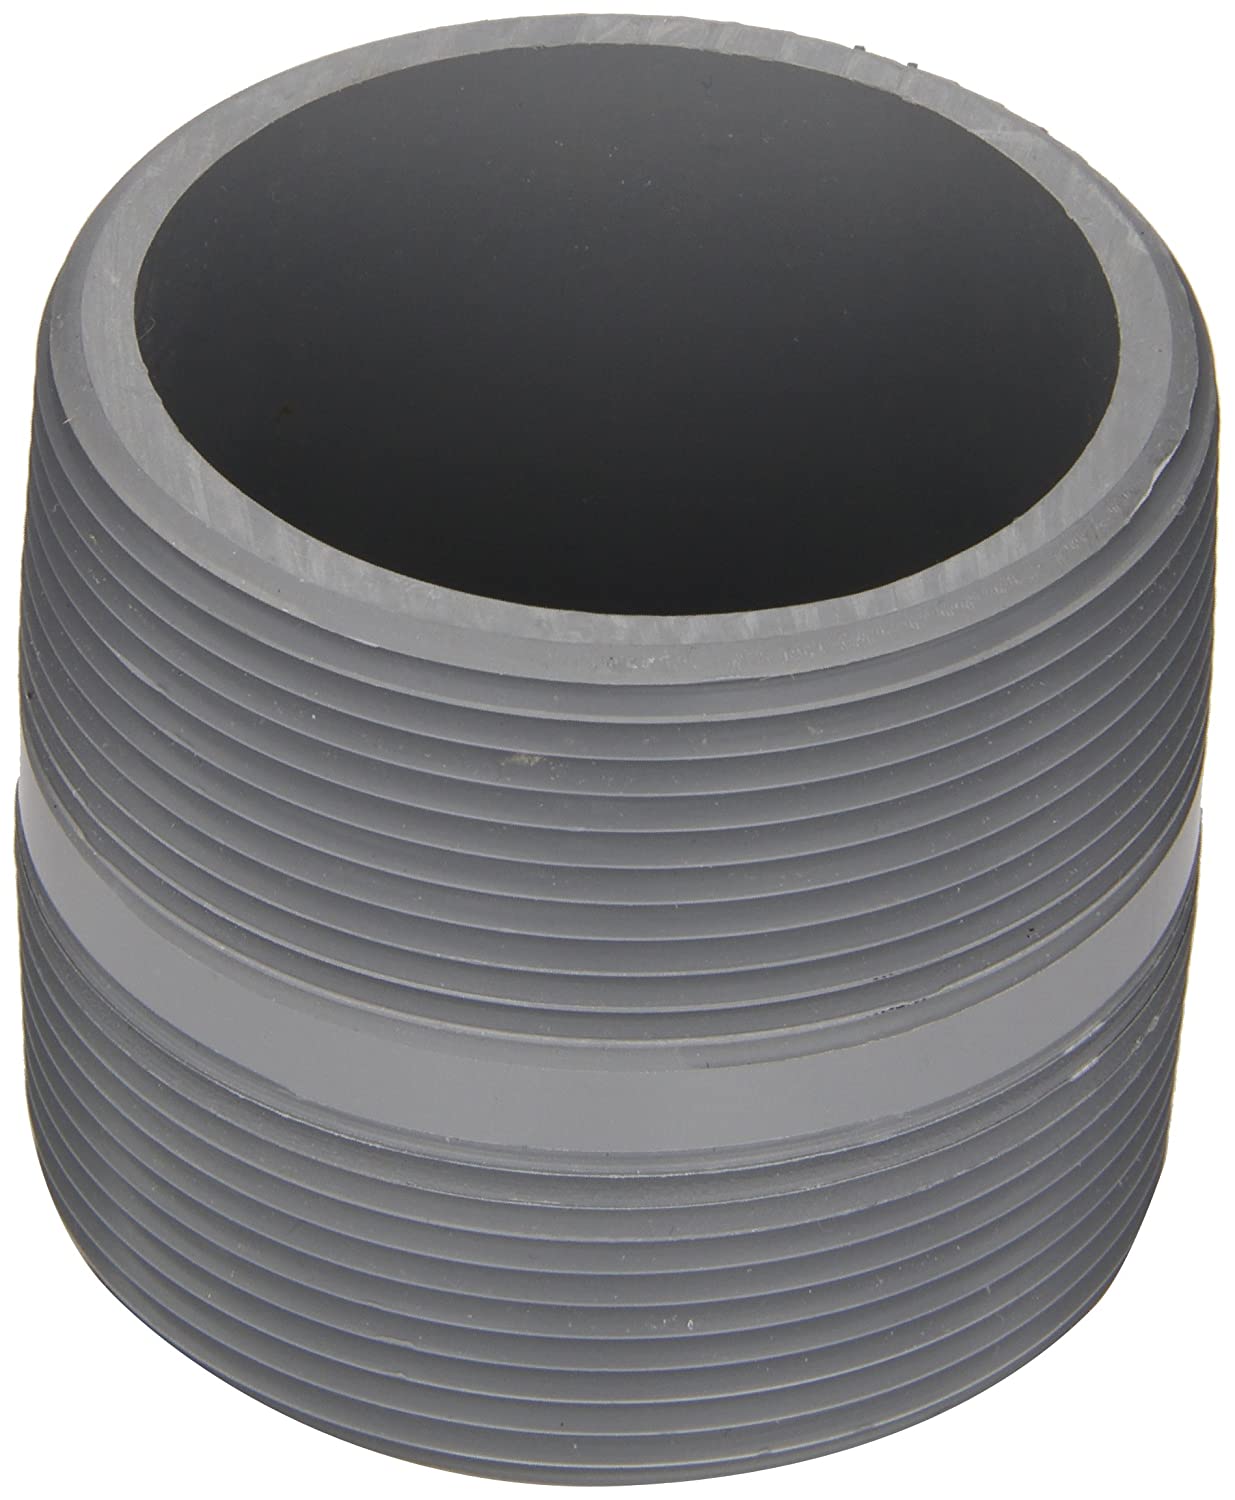 882-030C - CPVC Pipe Fitting, Nipple, Schedule 80, Gray, 1/2" NPT Male, 3" Length